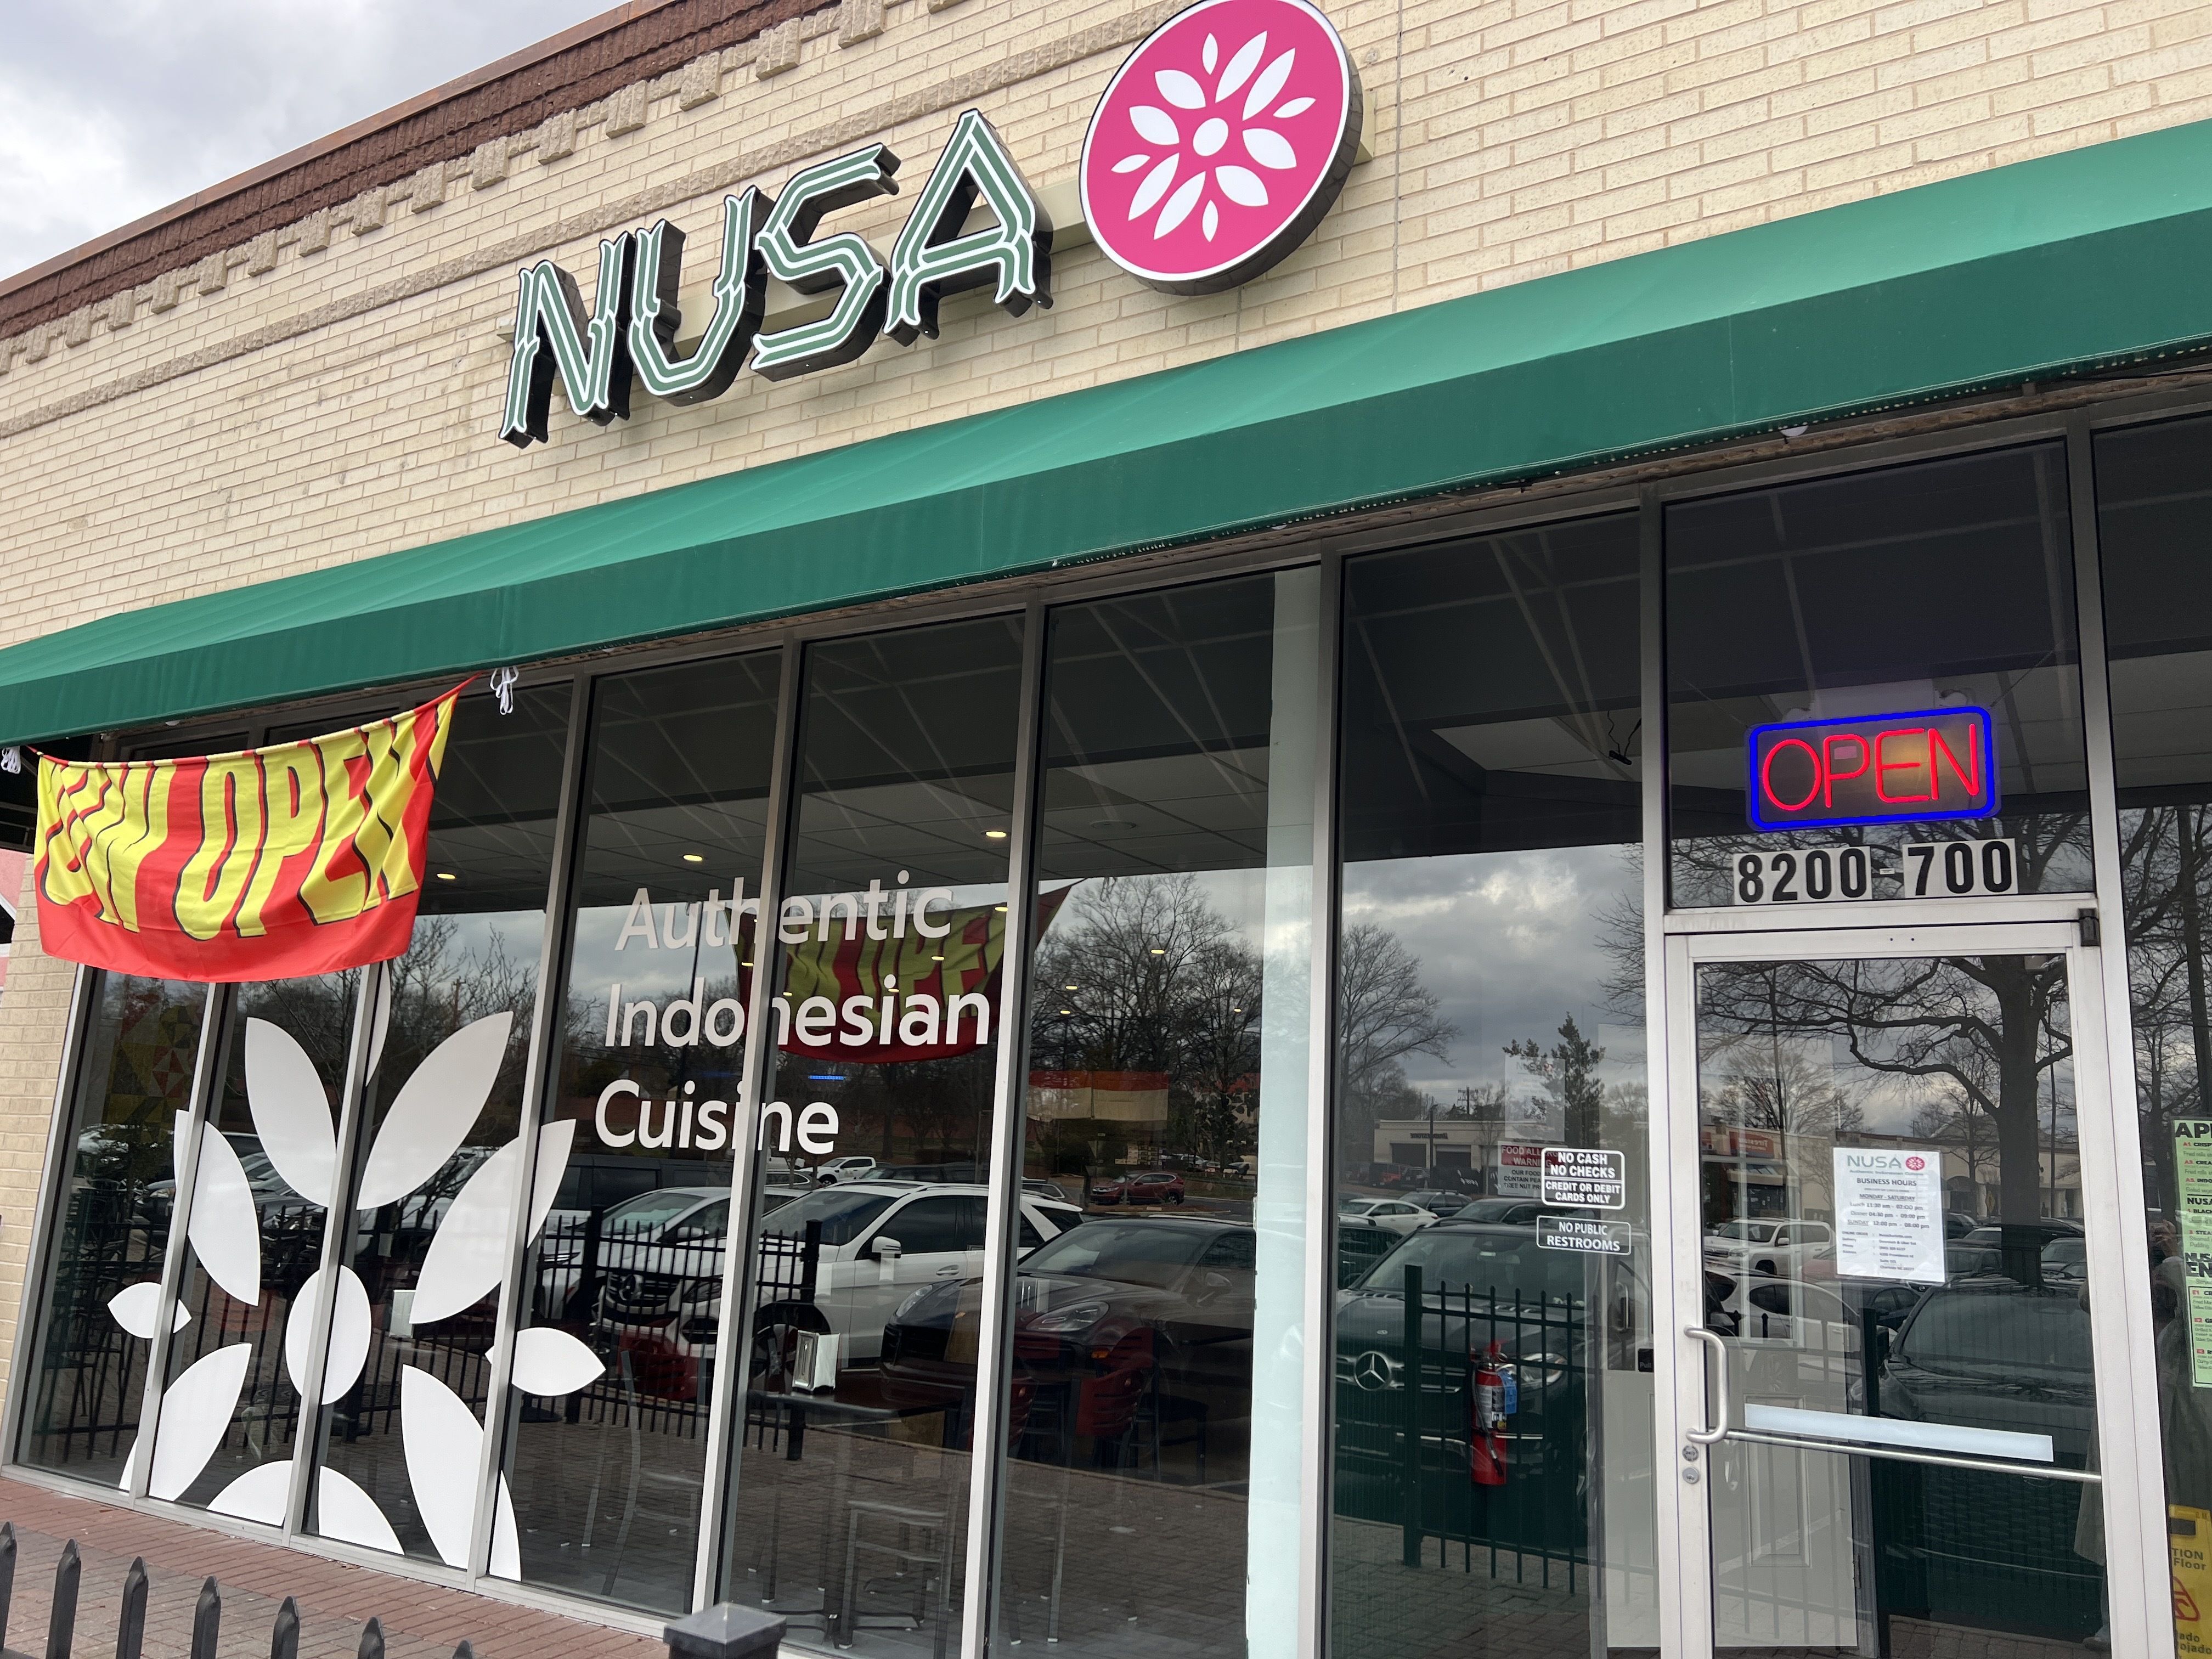 Outside of restaurant with signage that reads "Nusa" and "now open"